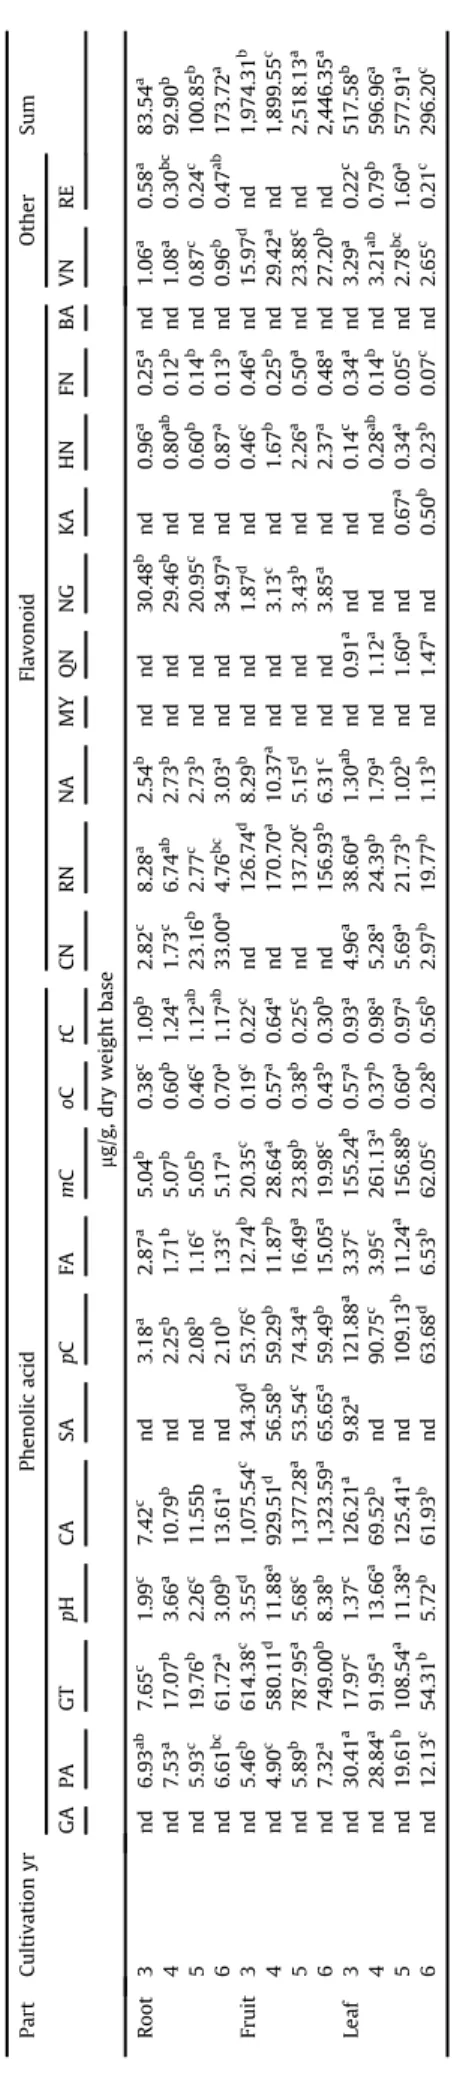 Table 4 shows the DPPH free-radical-scavenging activity (DPPH activity) of the 3 e6-yr-old ginseng fruit, leaves, and roots